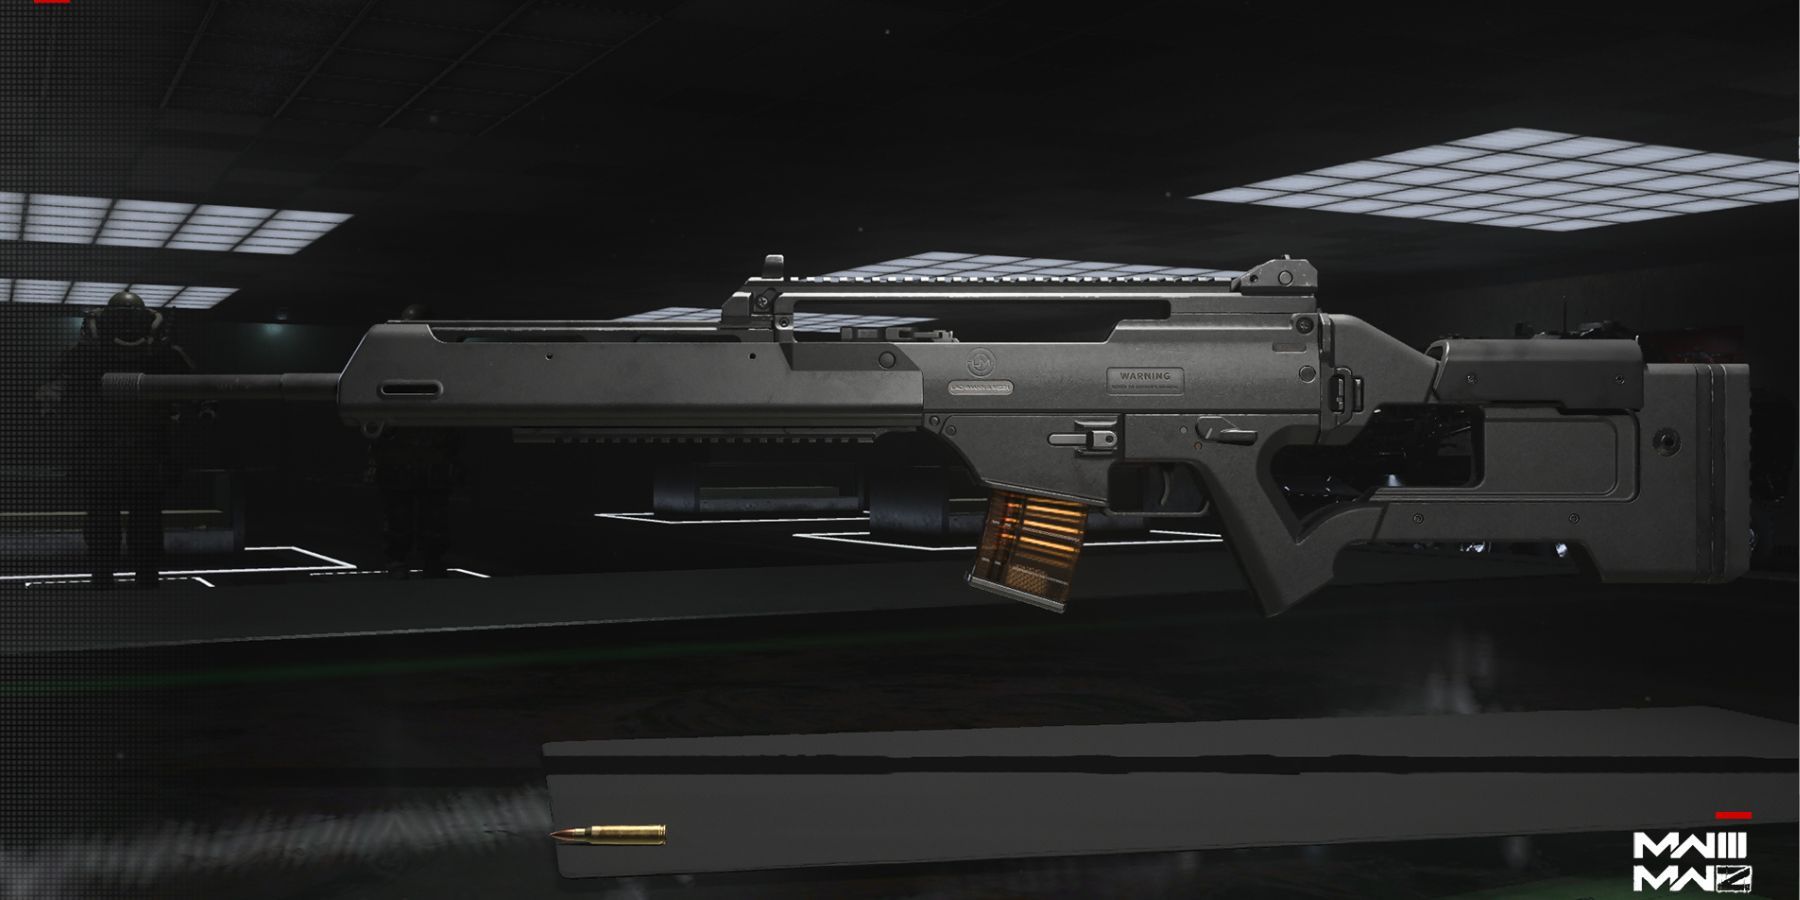 the new marksman rifle in mw3 called dm56.